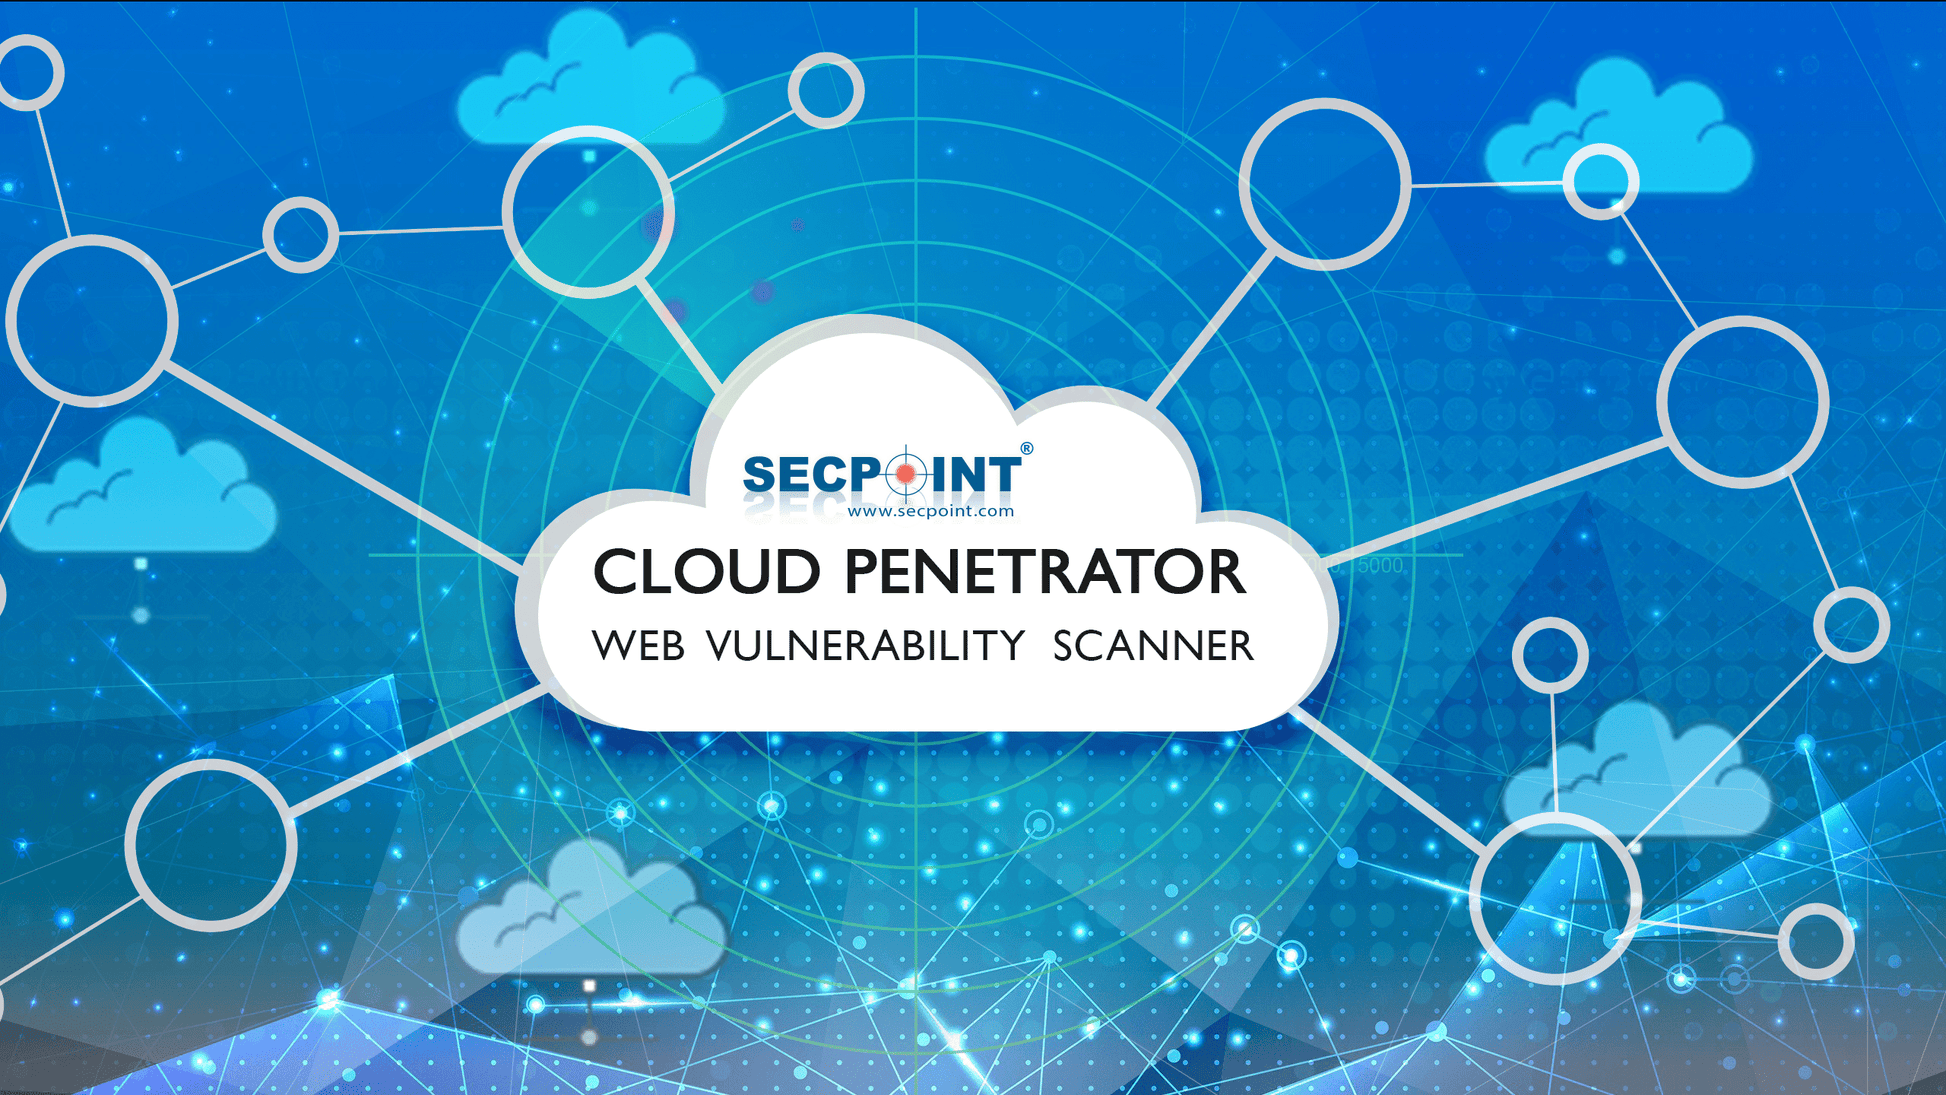 SecPoint Cloud Penetrator S9 - Vulnerability Scanning of 128 IP Static Scan License for 3 Years - SecPoint